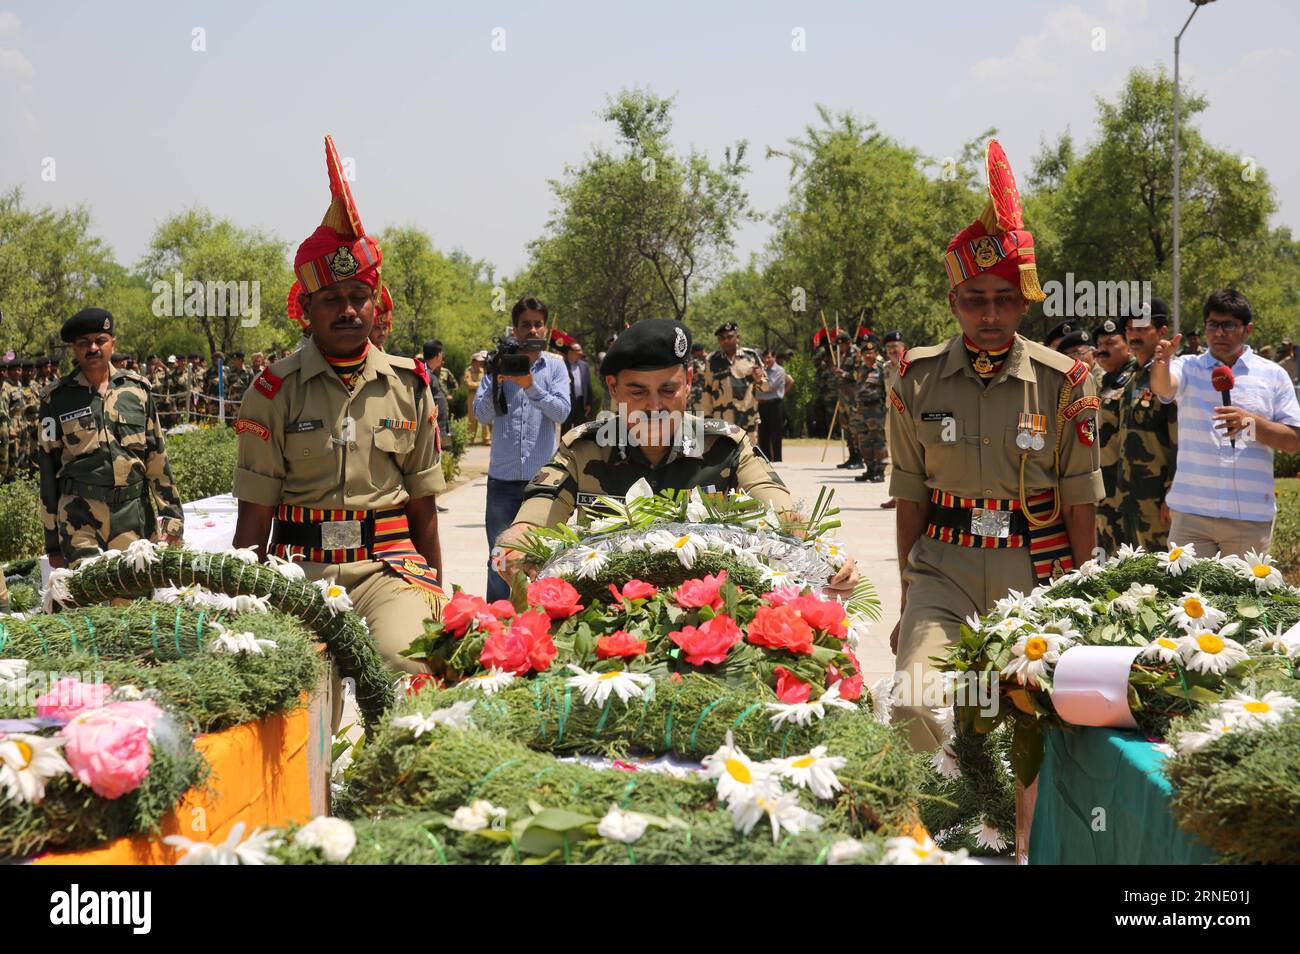 (160604) -- SRINAGAR, June 4, 2016 -- An officer of India s Border Security Force (BSF) lays a floral wreath in front of coffins of slain border guards during a wreath laying ceremony at a BSF camp in the outskirts of Srinagar, summer capital of Indian-controlled Kashmir, June 4, 2016. The militant attack on convoy of India s Border Security Force (BSF) on Friday left three border guards dead and nine others wounded, two of them critically, in restive Indian-controlled Kashmir, officials said. ) (cyc) INDIA-KASHMIR-SRINAGAR-MILITANT ATTACK JavedxDar PUBLICATIONxNOTxINxCHN   160604 Srinagar Jun Stock Photo